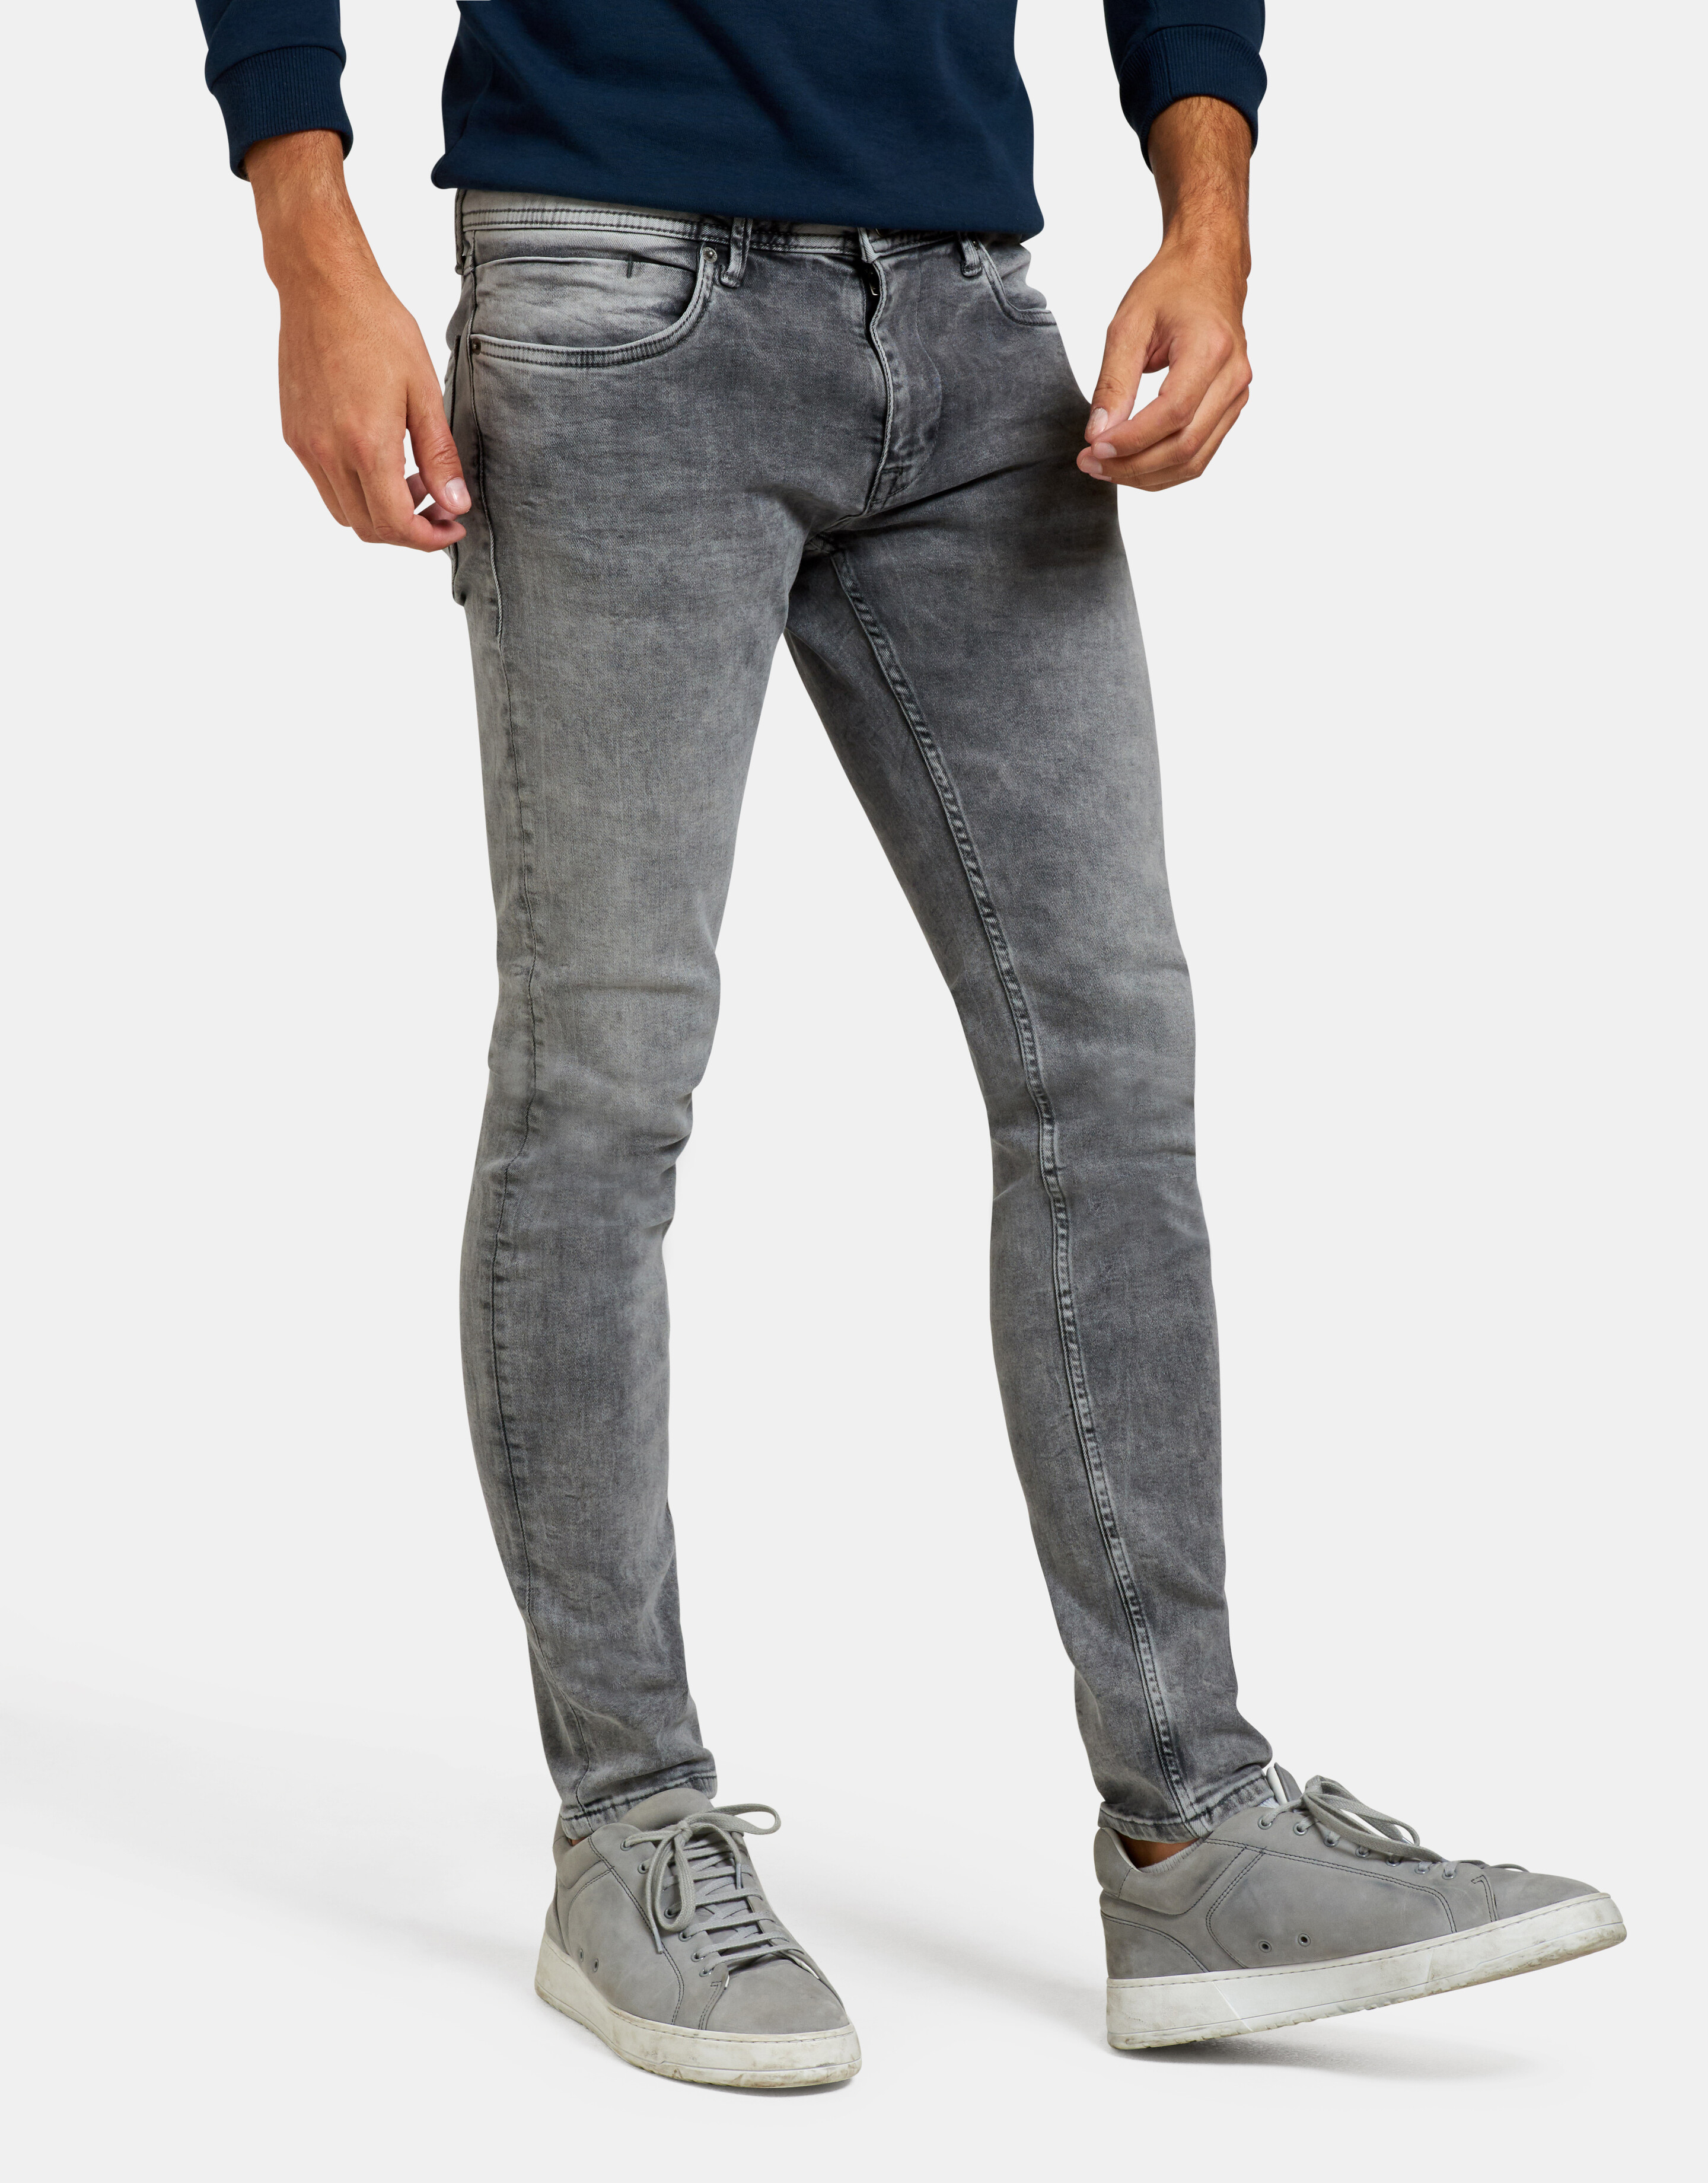 Leroy Skinny Grey Jeans L34 REFILL AUTHENTIC